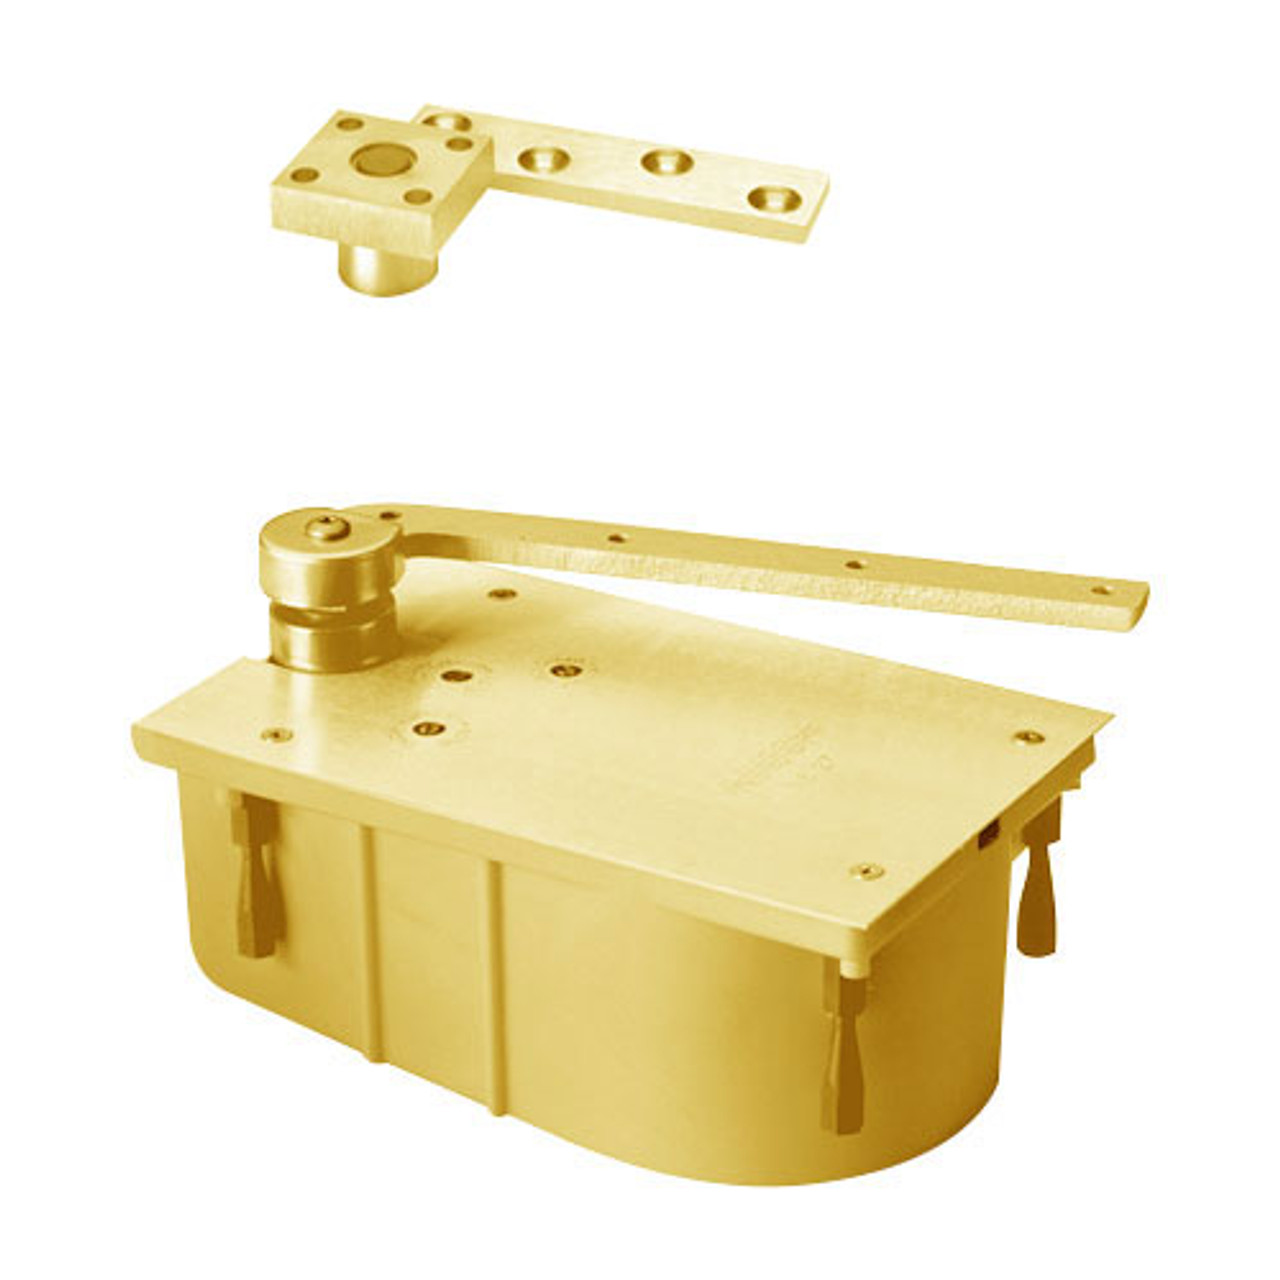 427-95S-LFP-LH-605 Rixson 427 Series Heavy Duty 3/4" Offset Hung Floor Closer in Bright Brass Finish